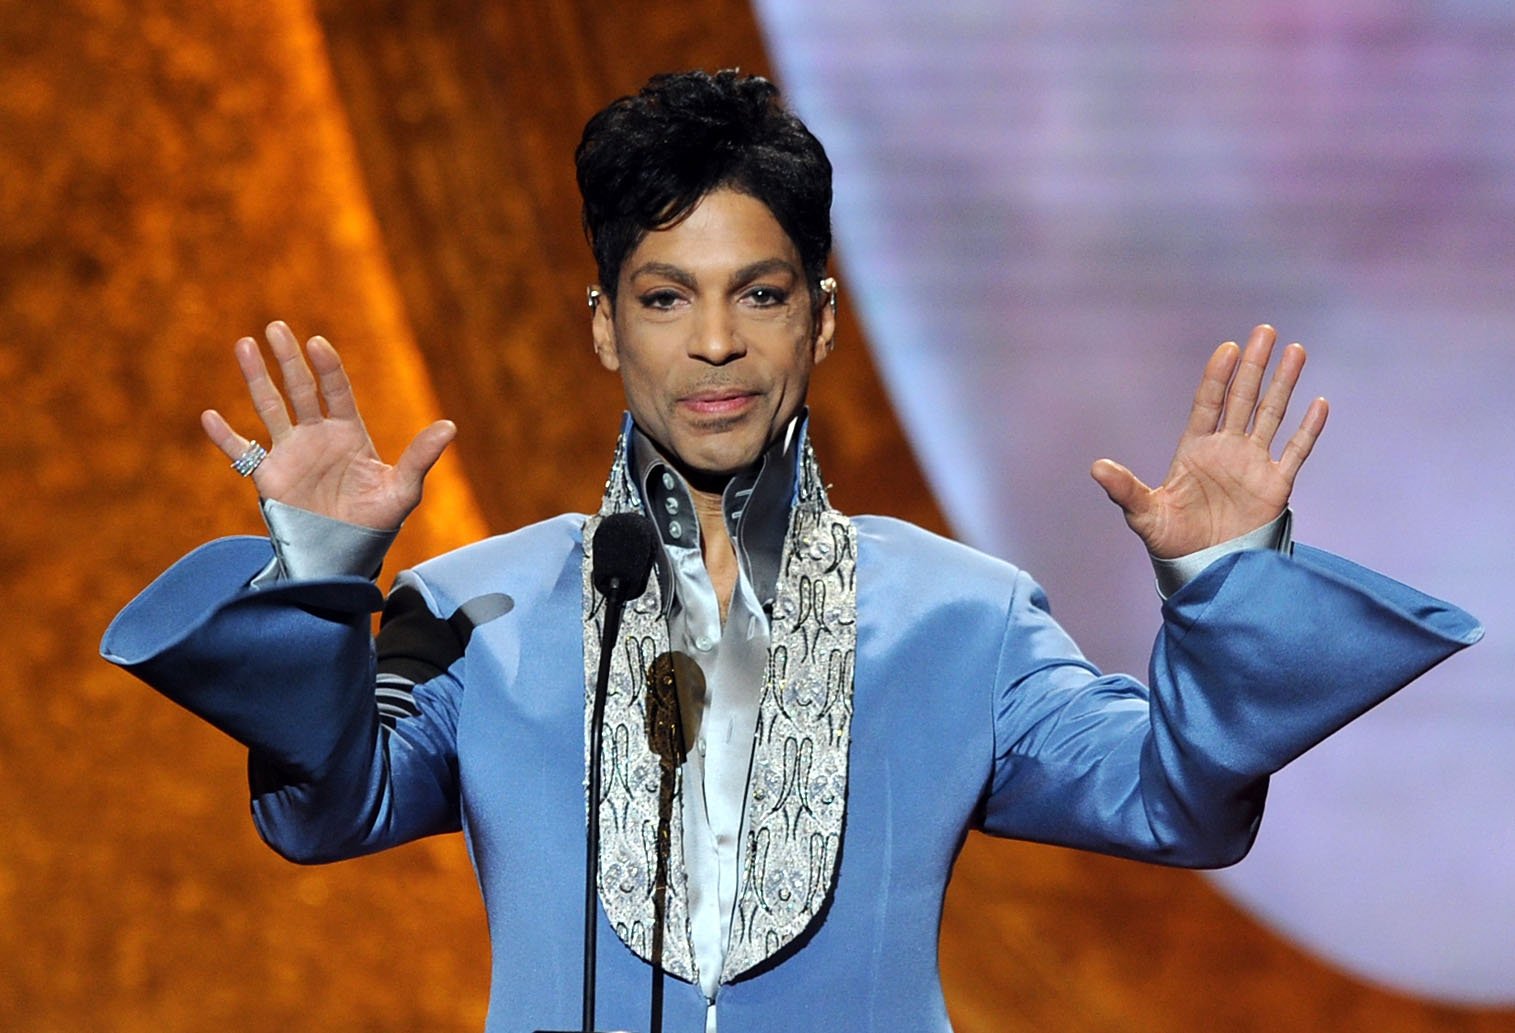 Prince reacts to Chappelle's Show sketch